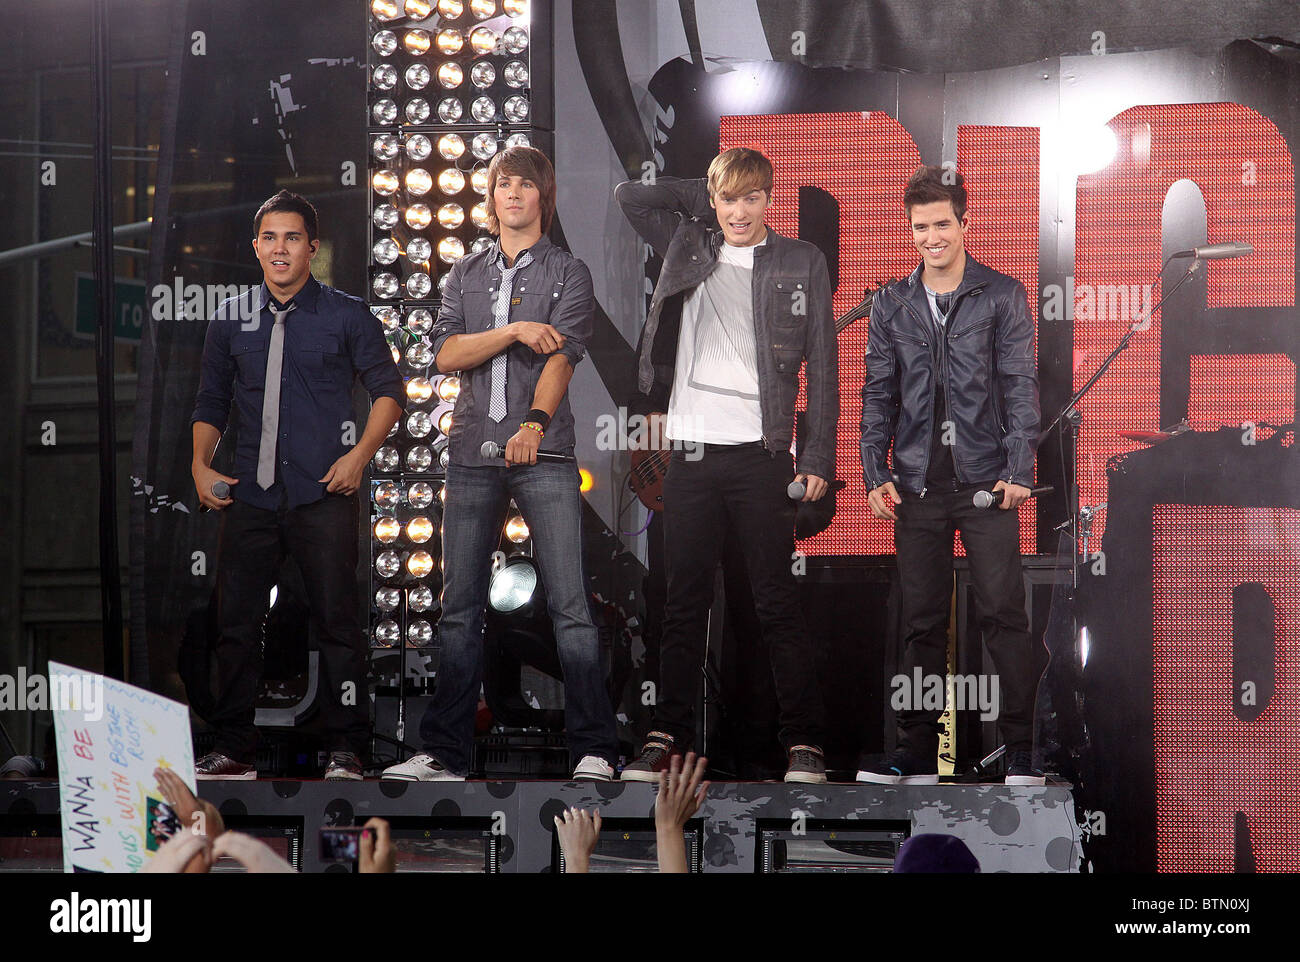 Nickelodeon's BIG TIME RUSH Concert in Times Square Stock Photo